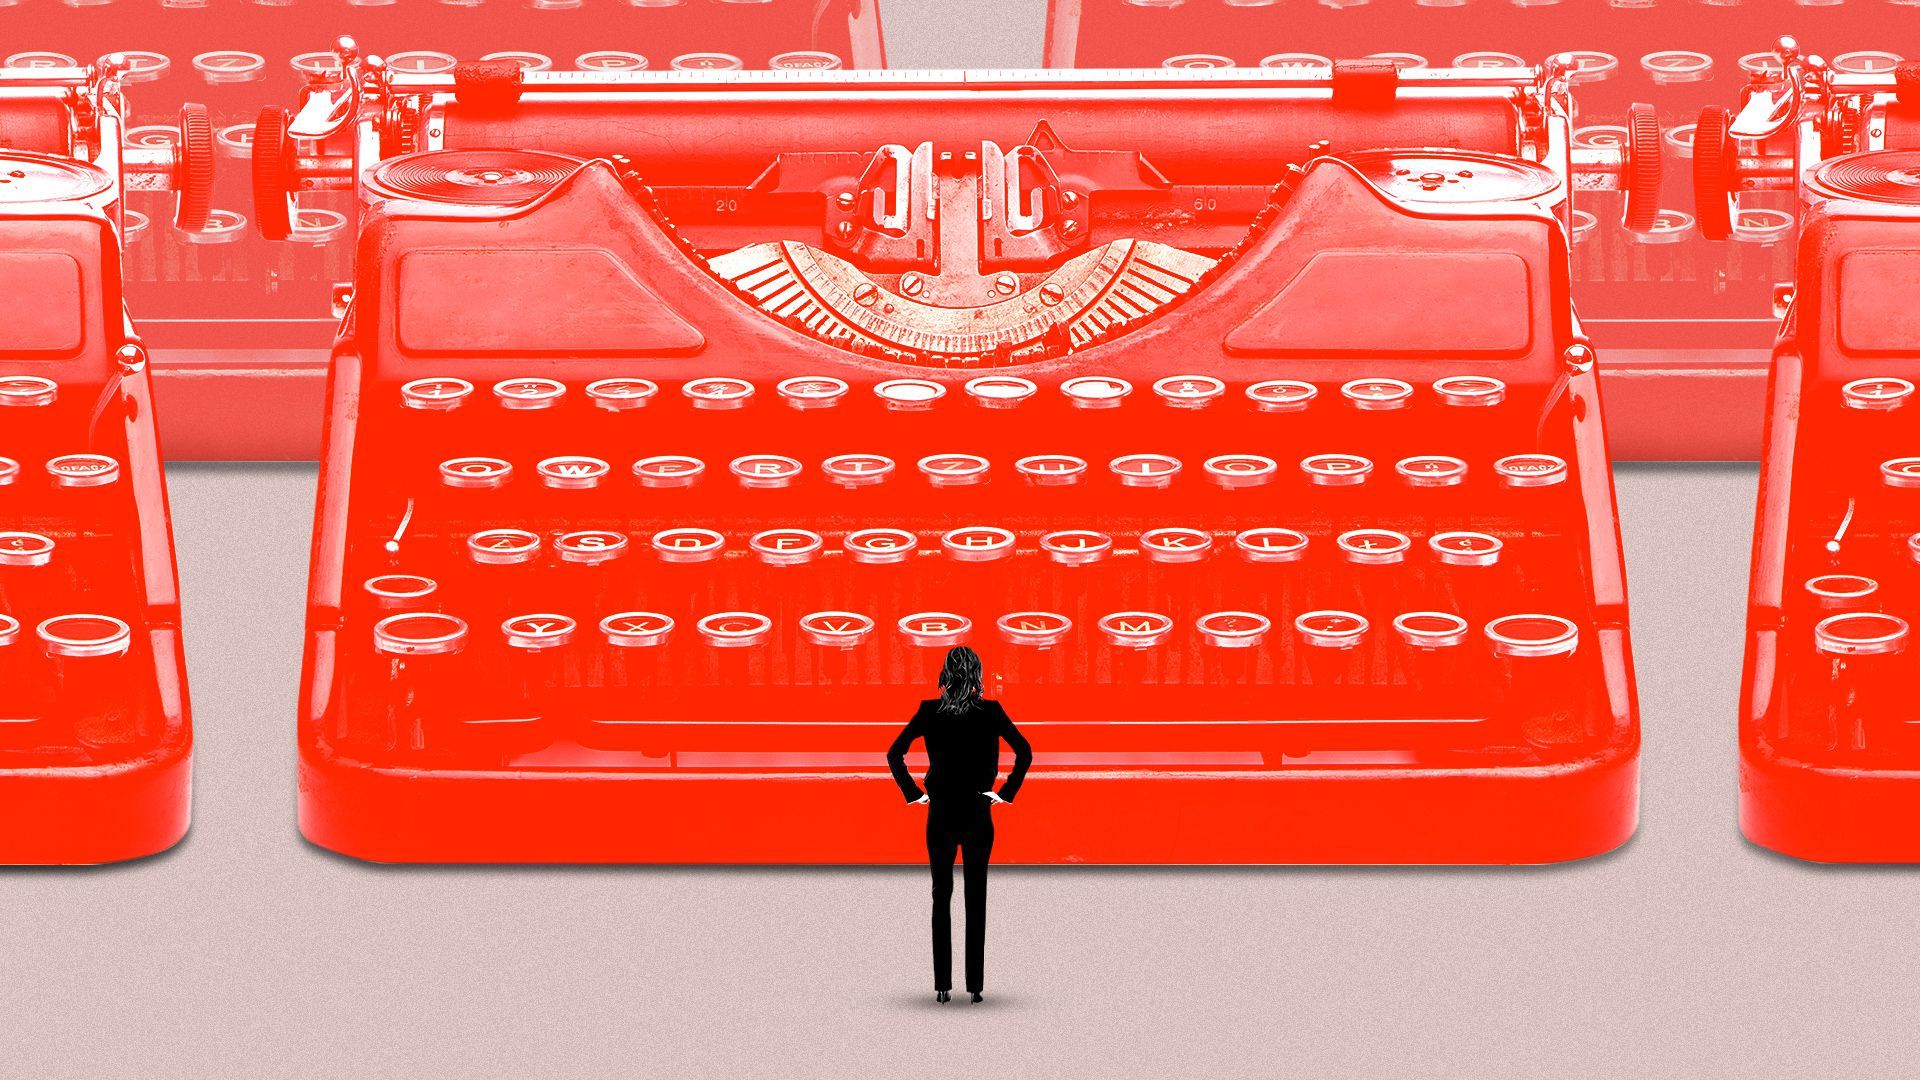 Illustration of a woman in a suit standing with her hands on her hips in front of rows of typewriters. 